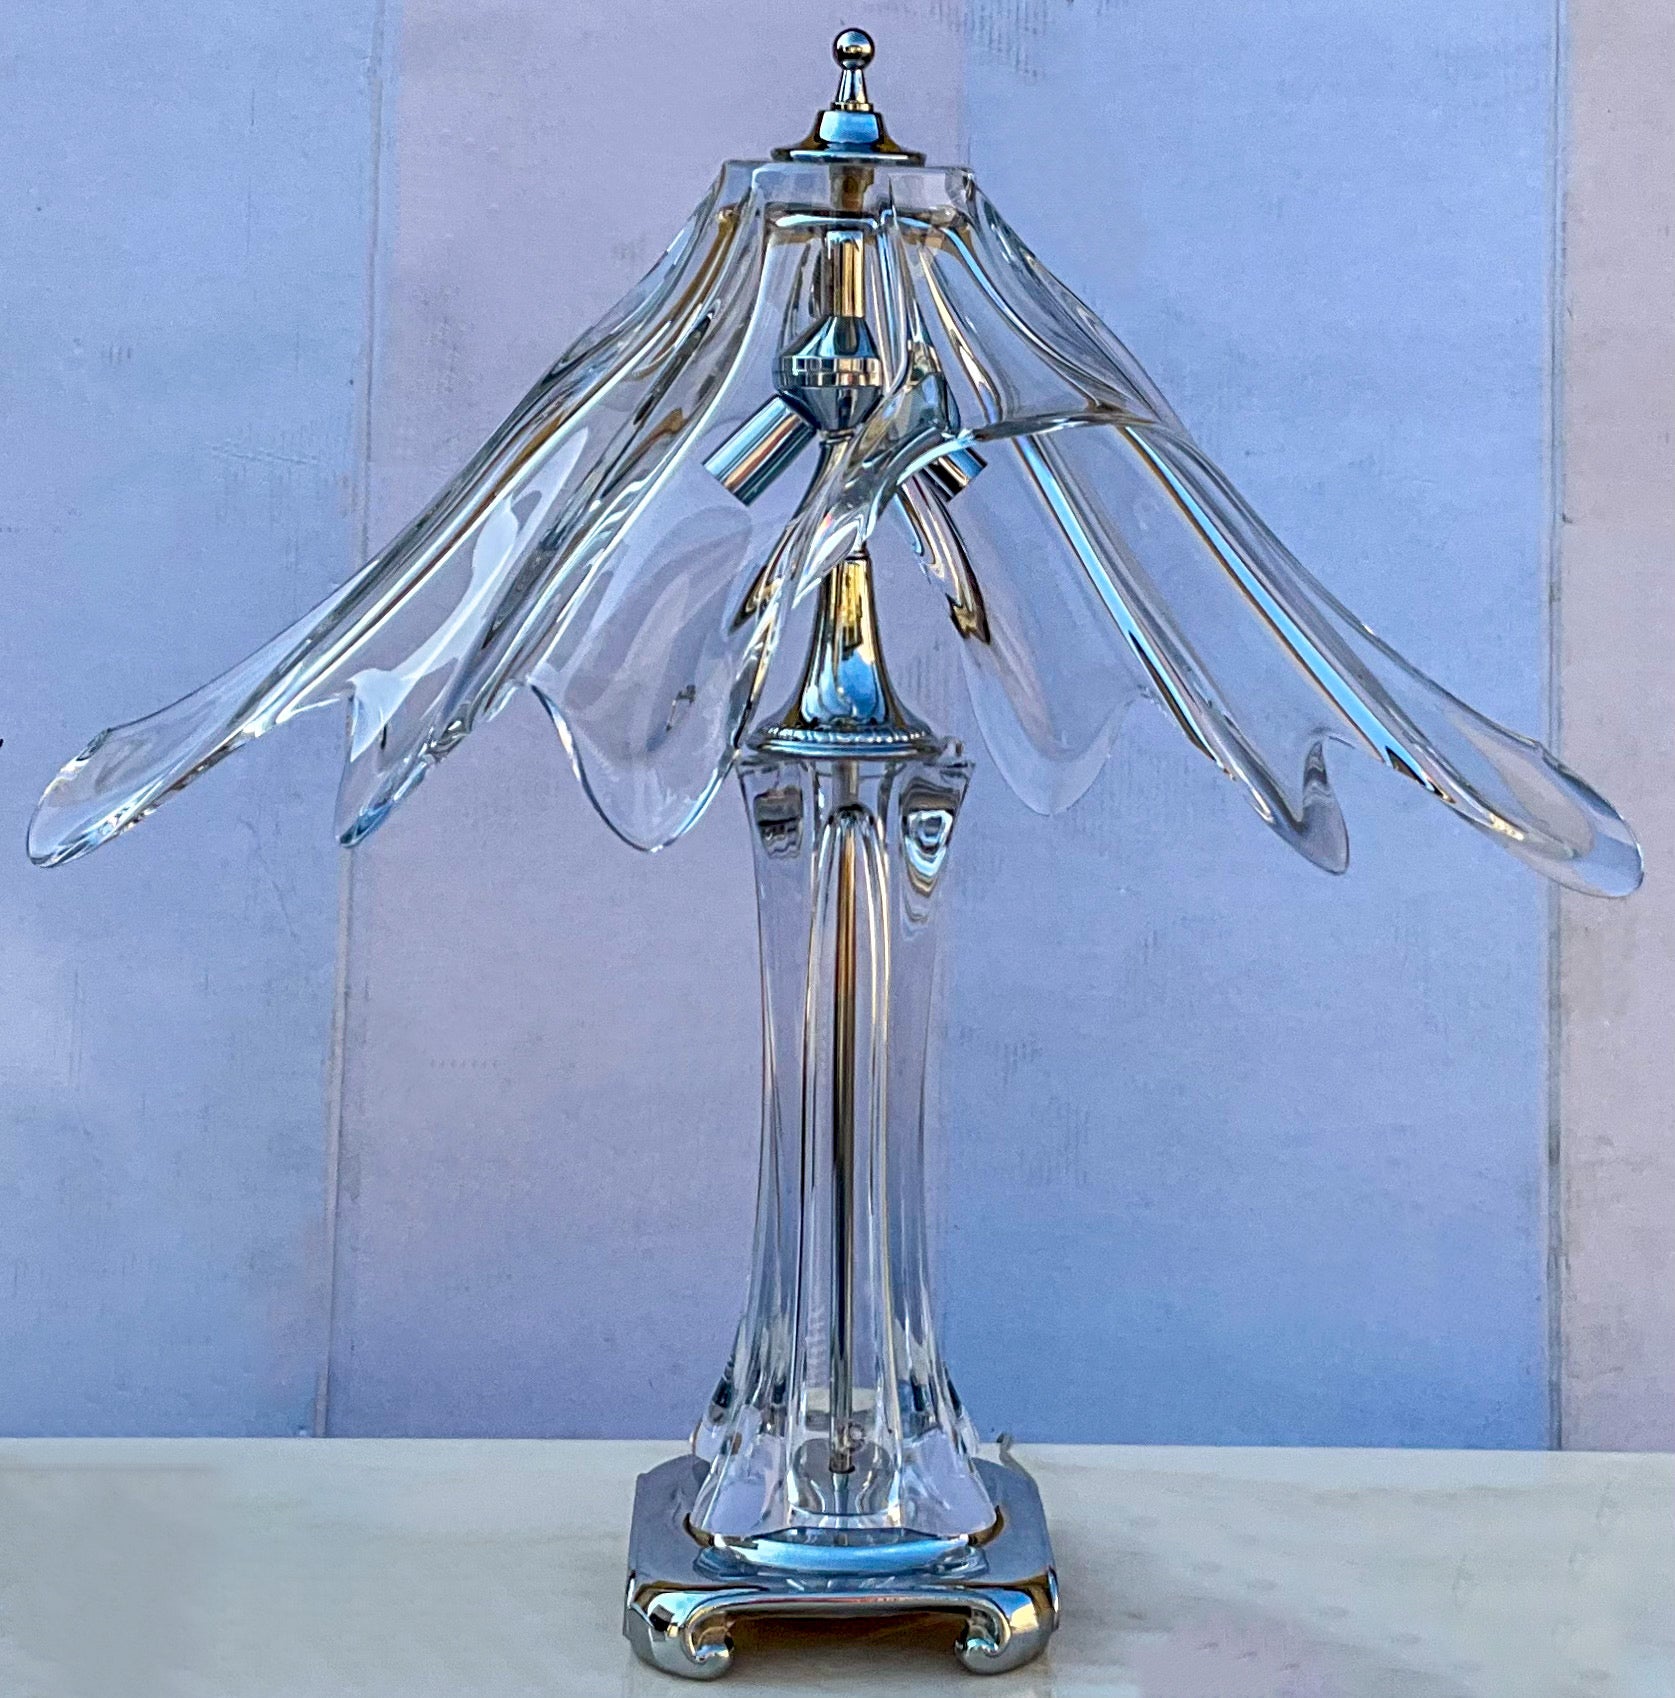 This is a beautiful hand blown crystal and chrome art glass lamp by Cofrac Art Verrier. The lamp accommodates two bulbs. The base is 7” square. It was crafted in France in the 1970s and is in very good condition.